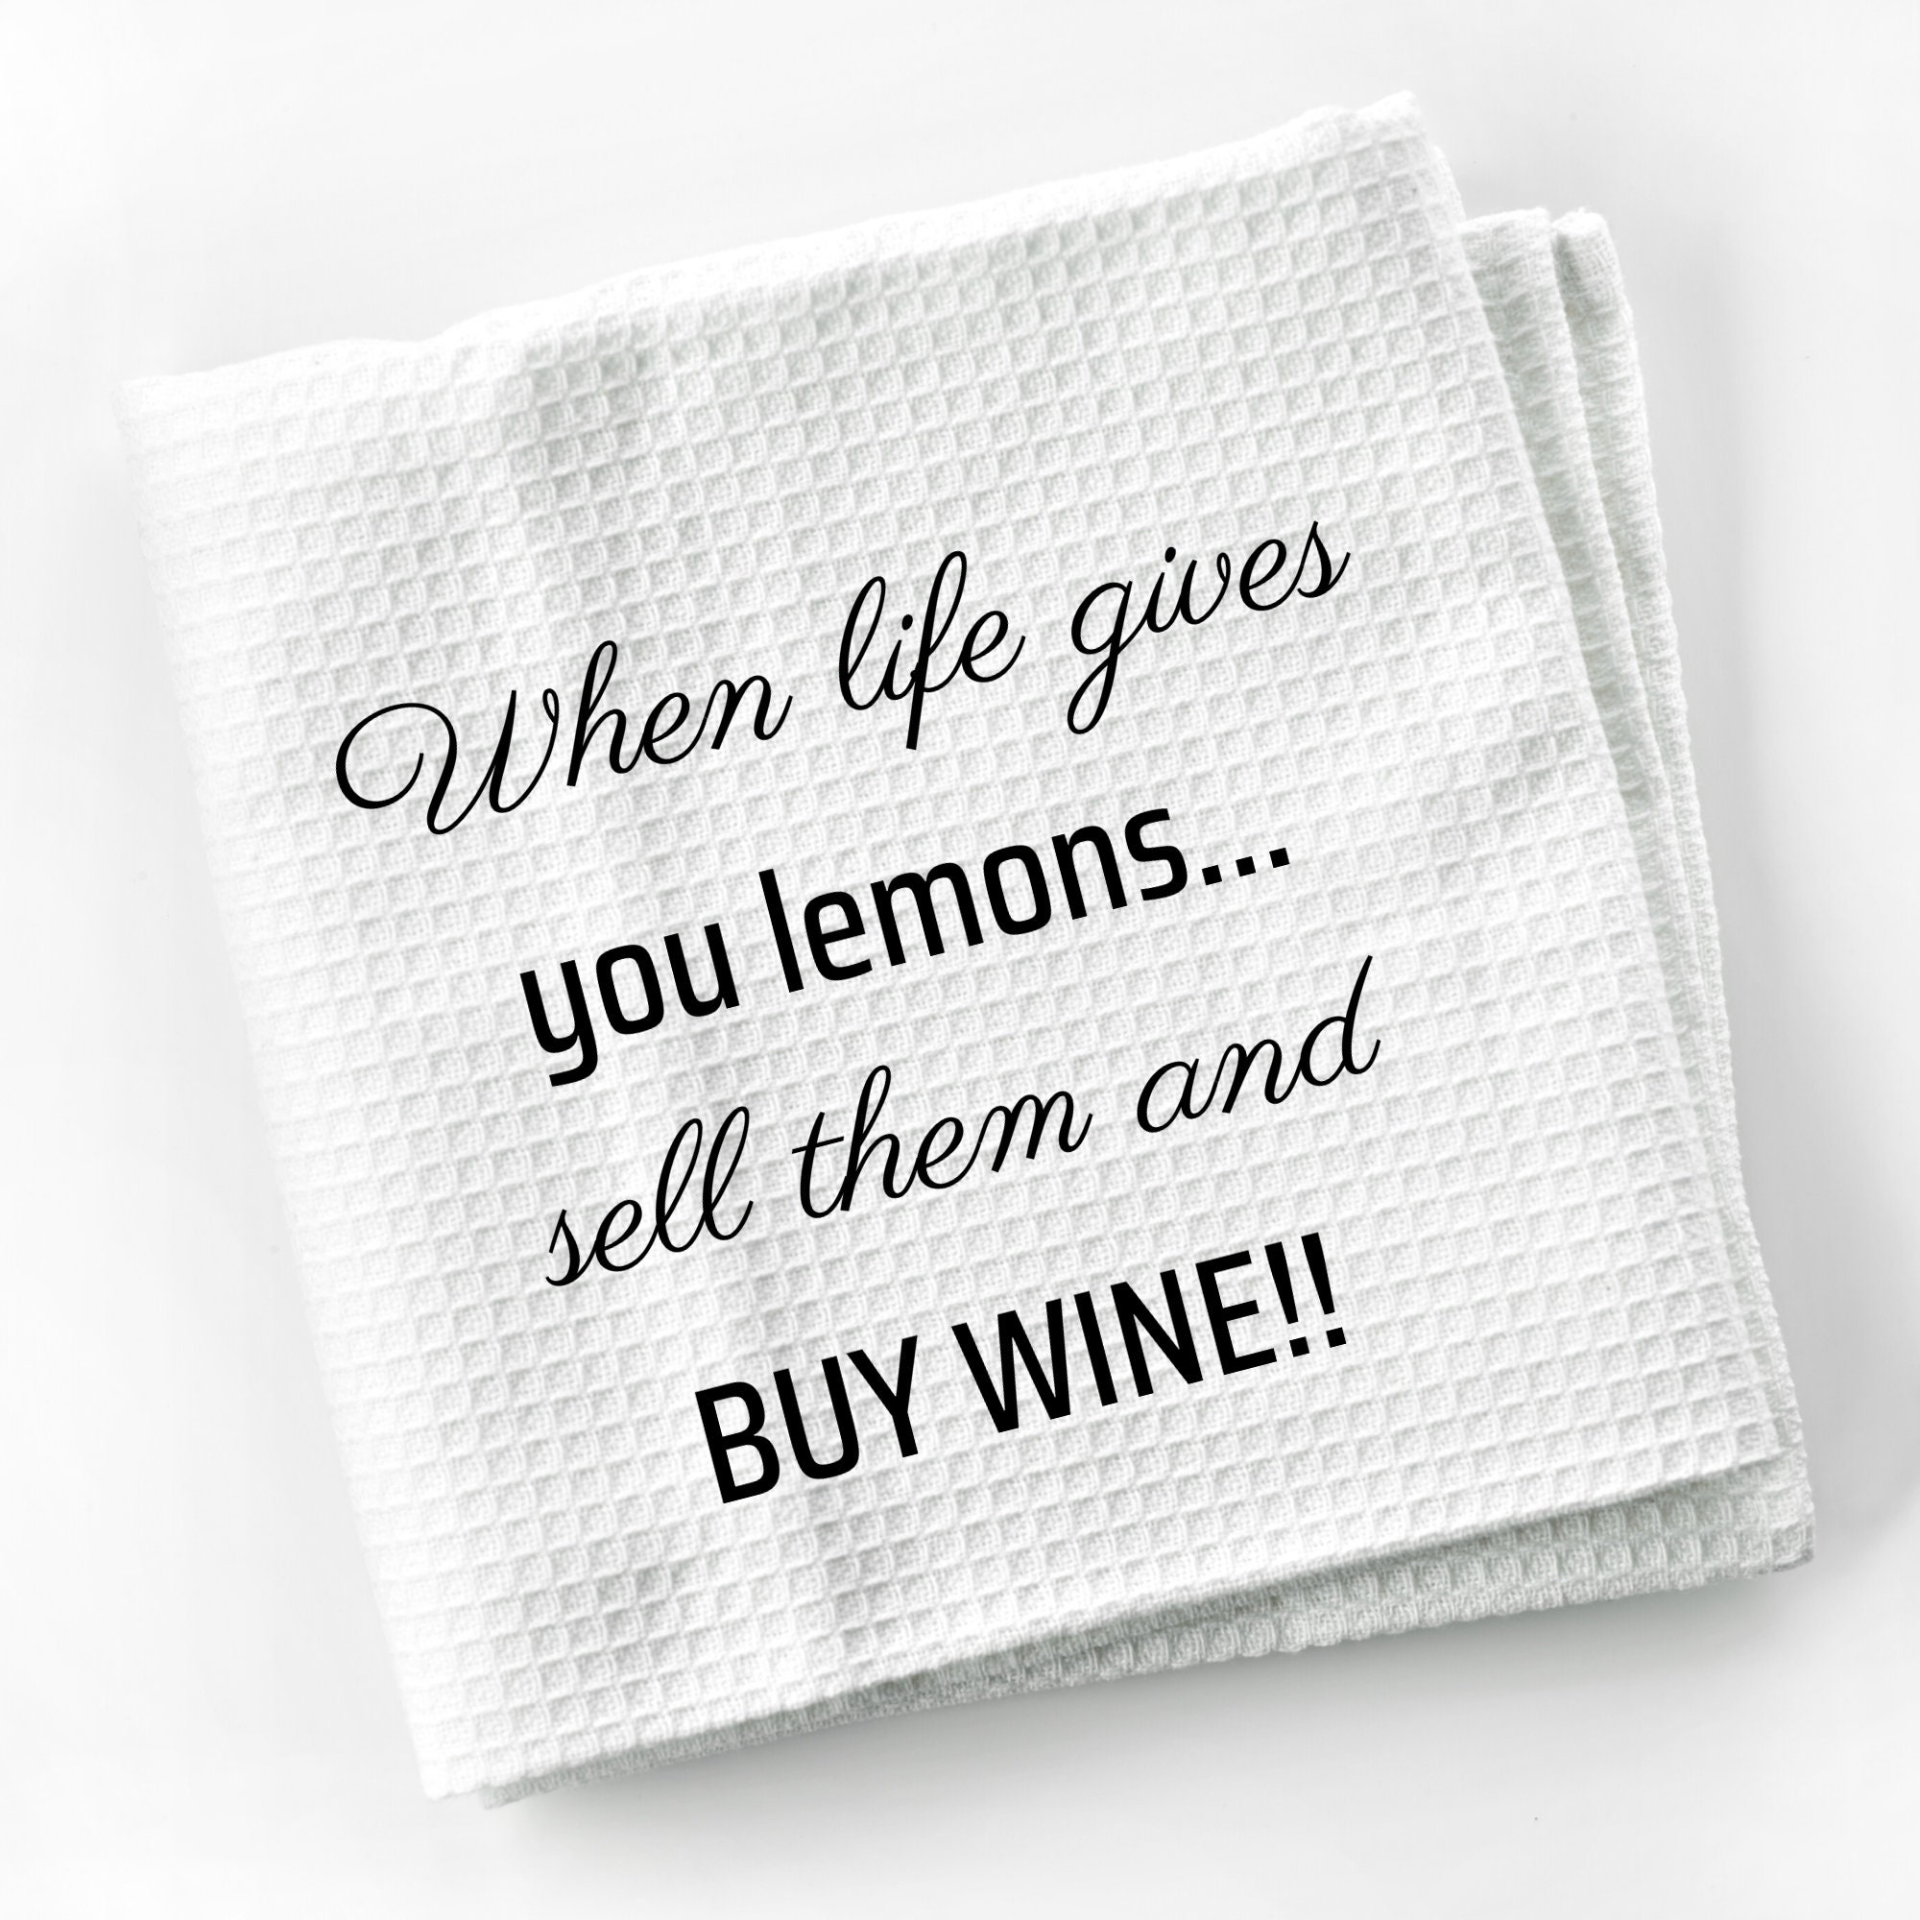 Buy Wine Funny Kitchen Towel Sayings | Farmhouse Sarcastic Dish Towel with Quote | Gift for Wine Lover or Cook, Goodies N Stuff